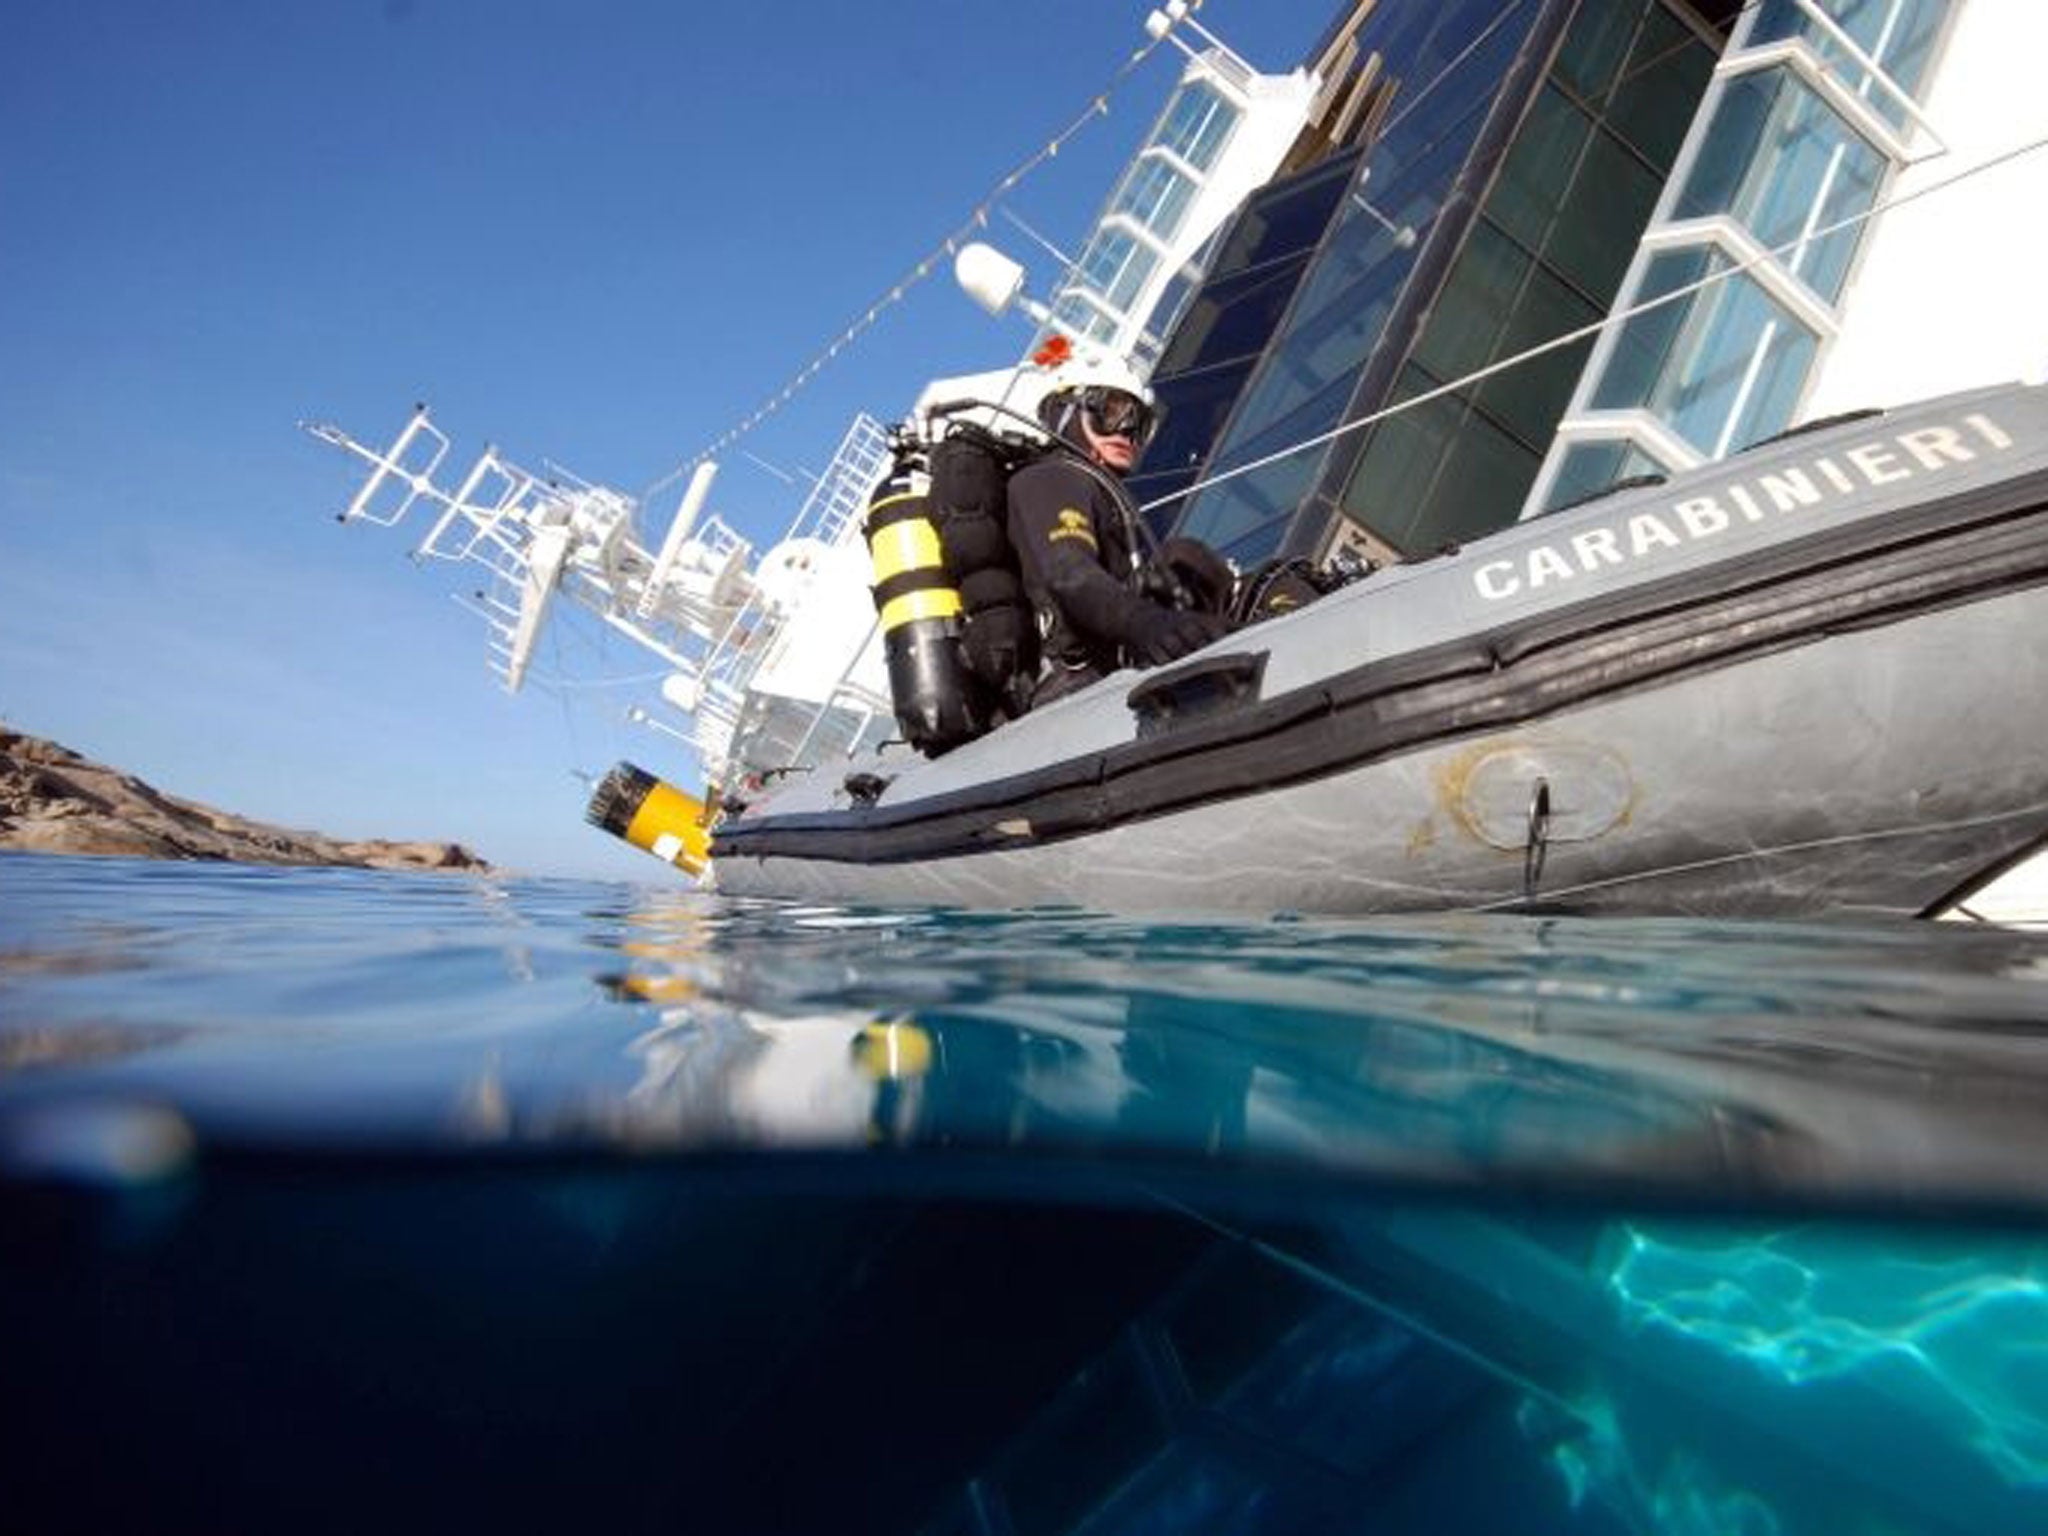 epa04297024 A picture released by the Italian Carabinieri on 03 July 2014 shows Carabinieri divers inspecting the Costa Concordia cruise ship, at Giglio Island, Italy, in 2012. The Costa Concordia hit a reef and partly capsized on 13 January 2012, after b